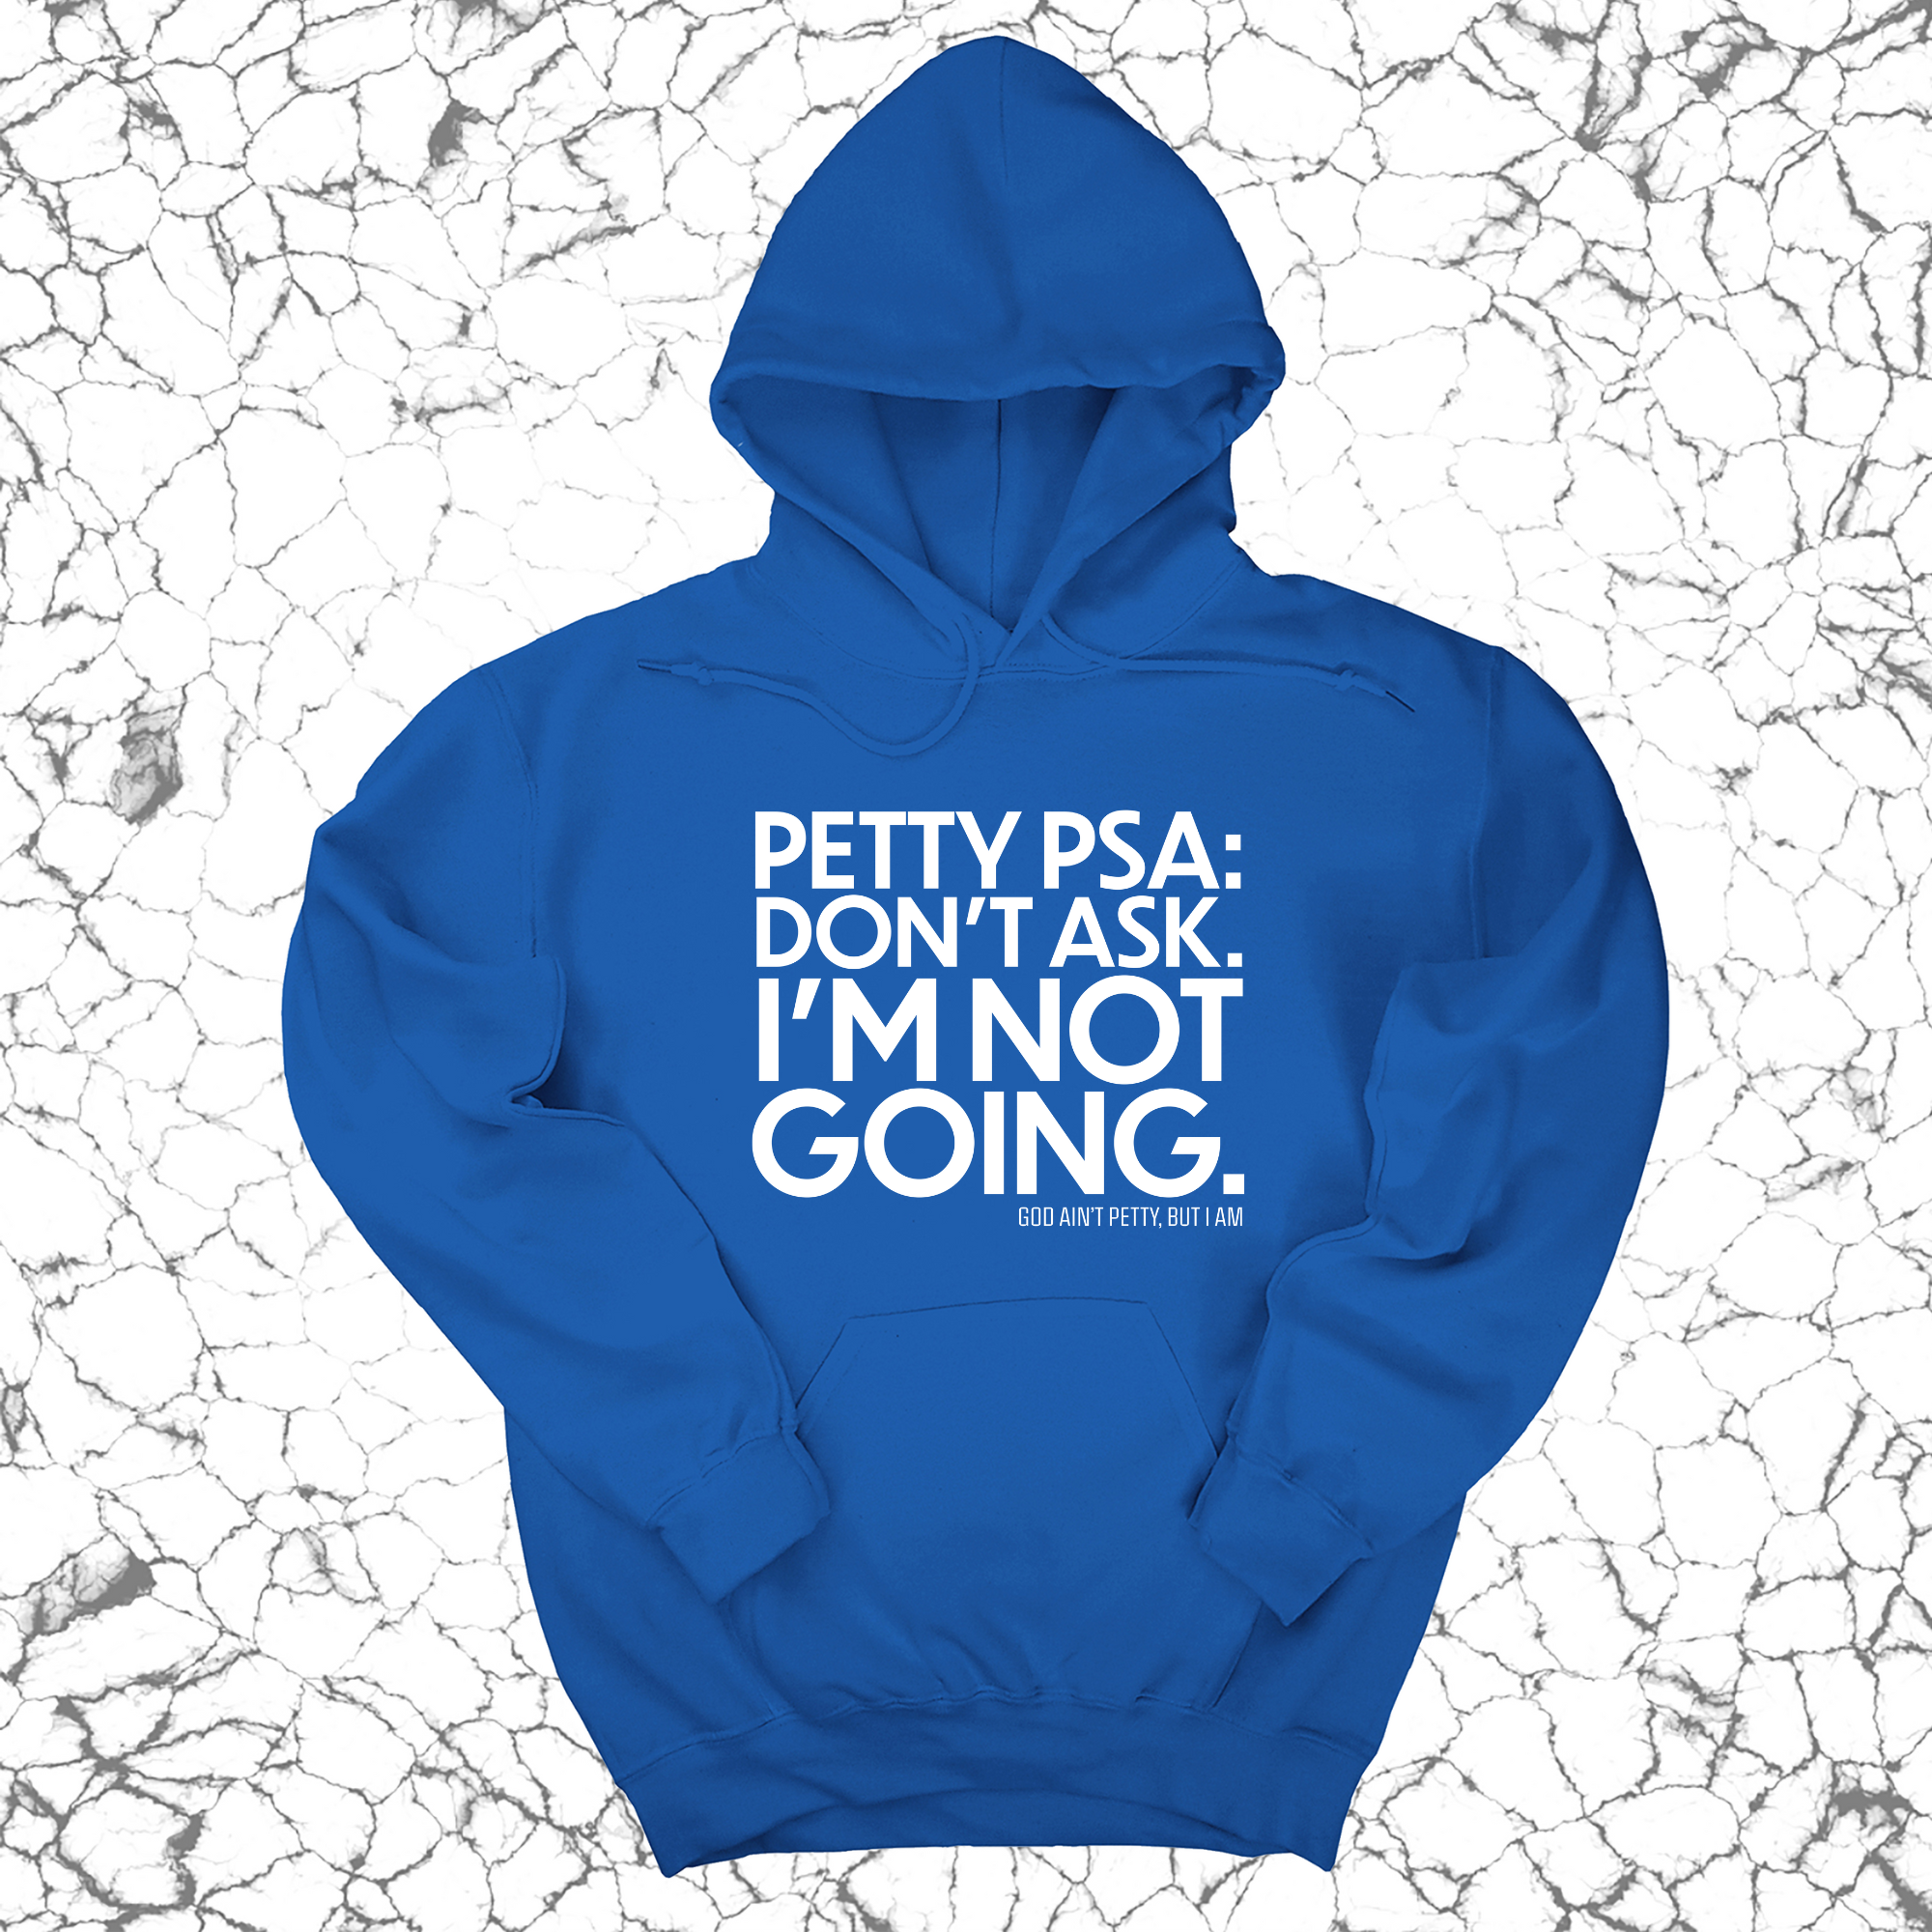 Petty PSA: Don't Ask. I'm Not Going. Unisex Hoodie-Hoodie-The Original God Ain't Petty But I Am